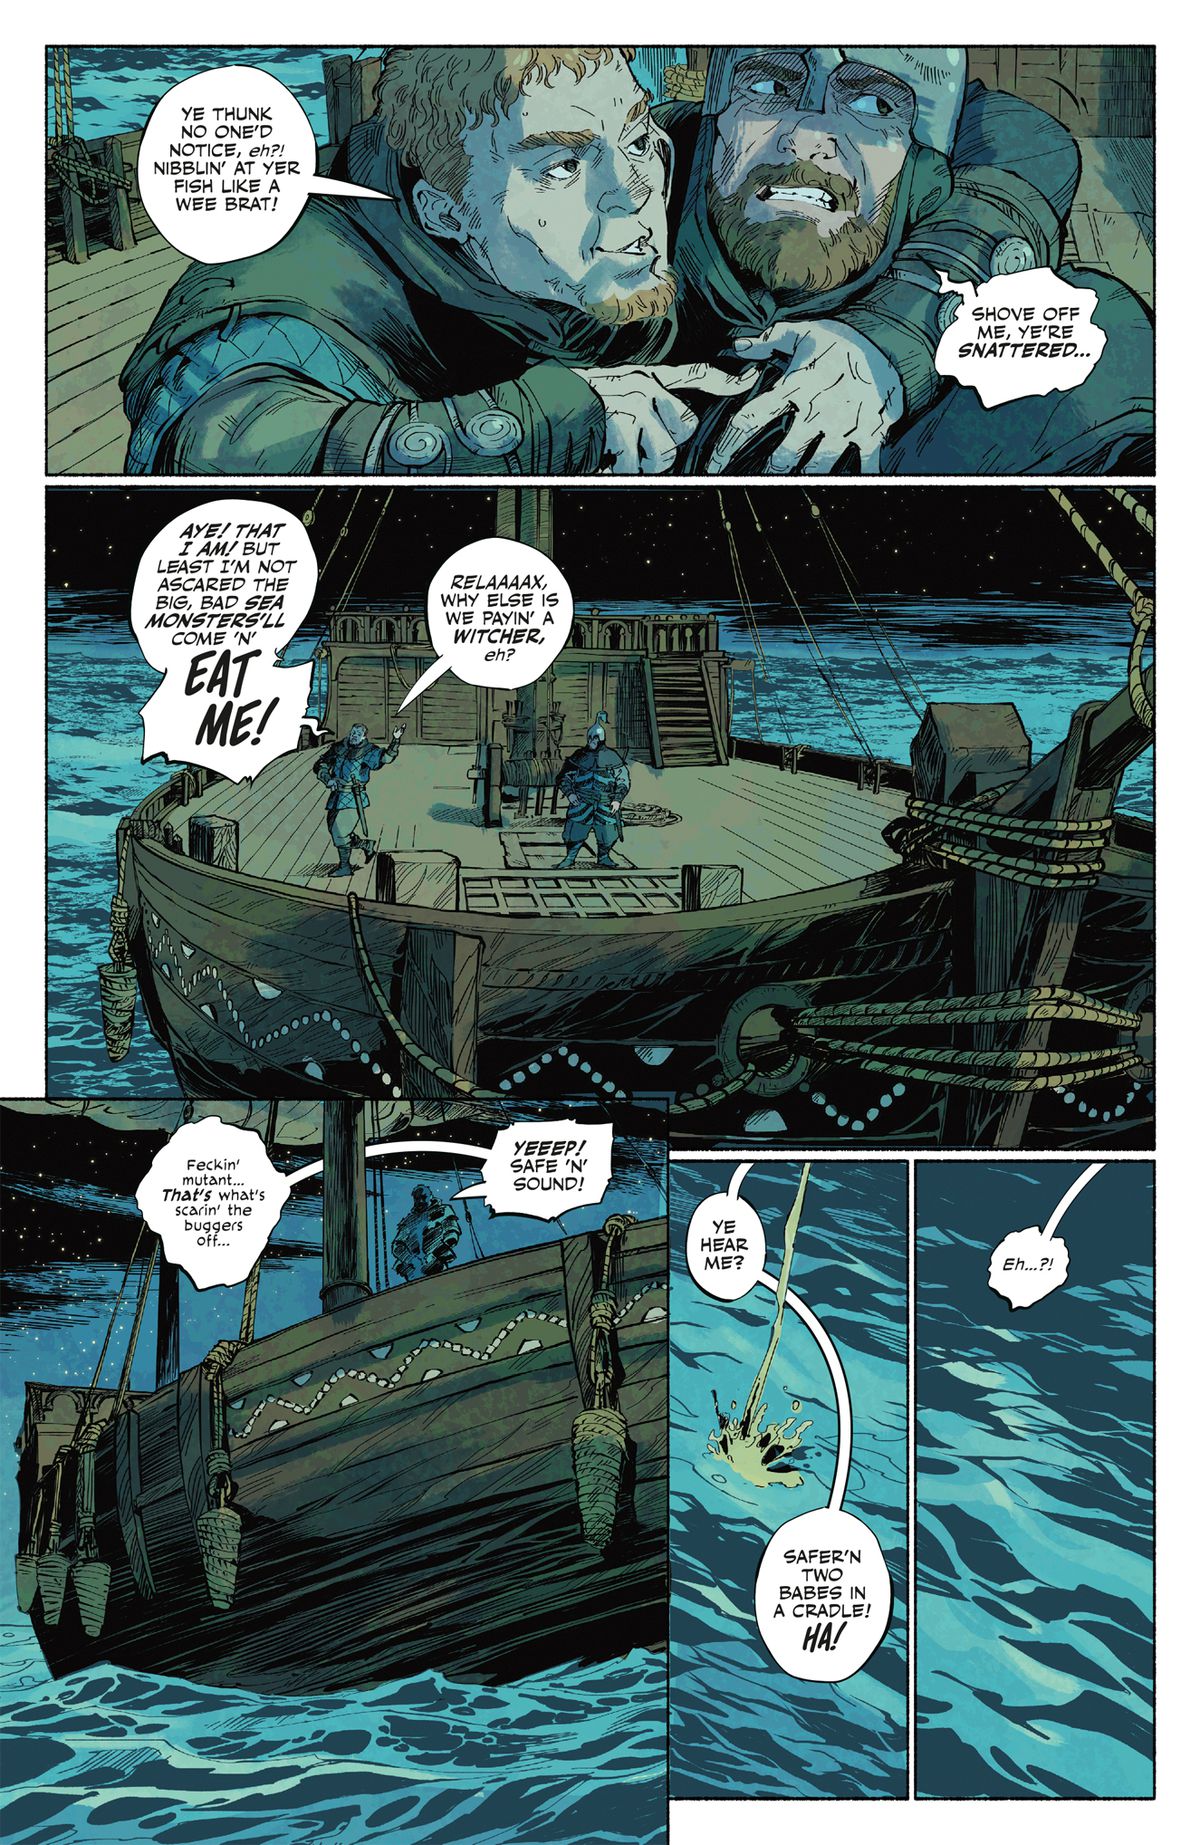 A page from The Witcher: Wild Animals comic book